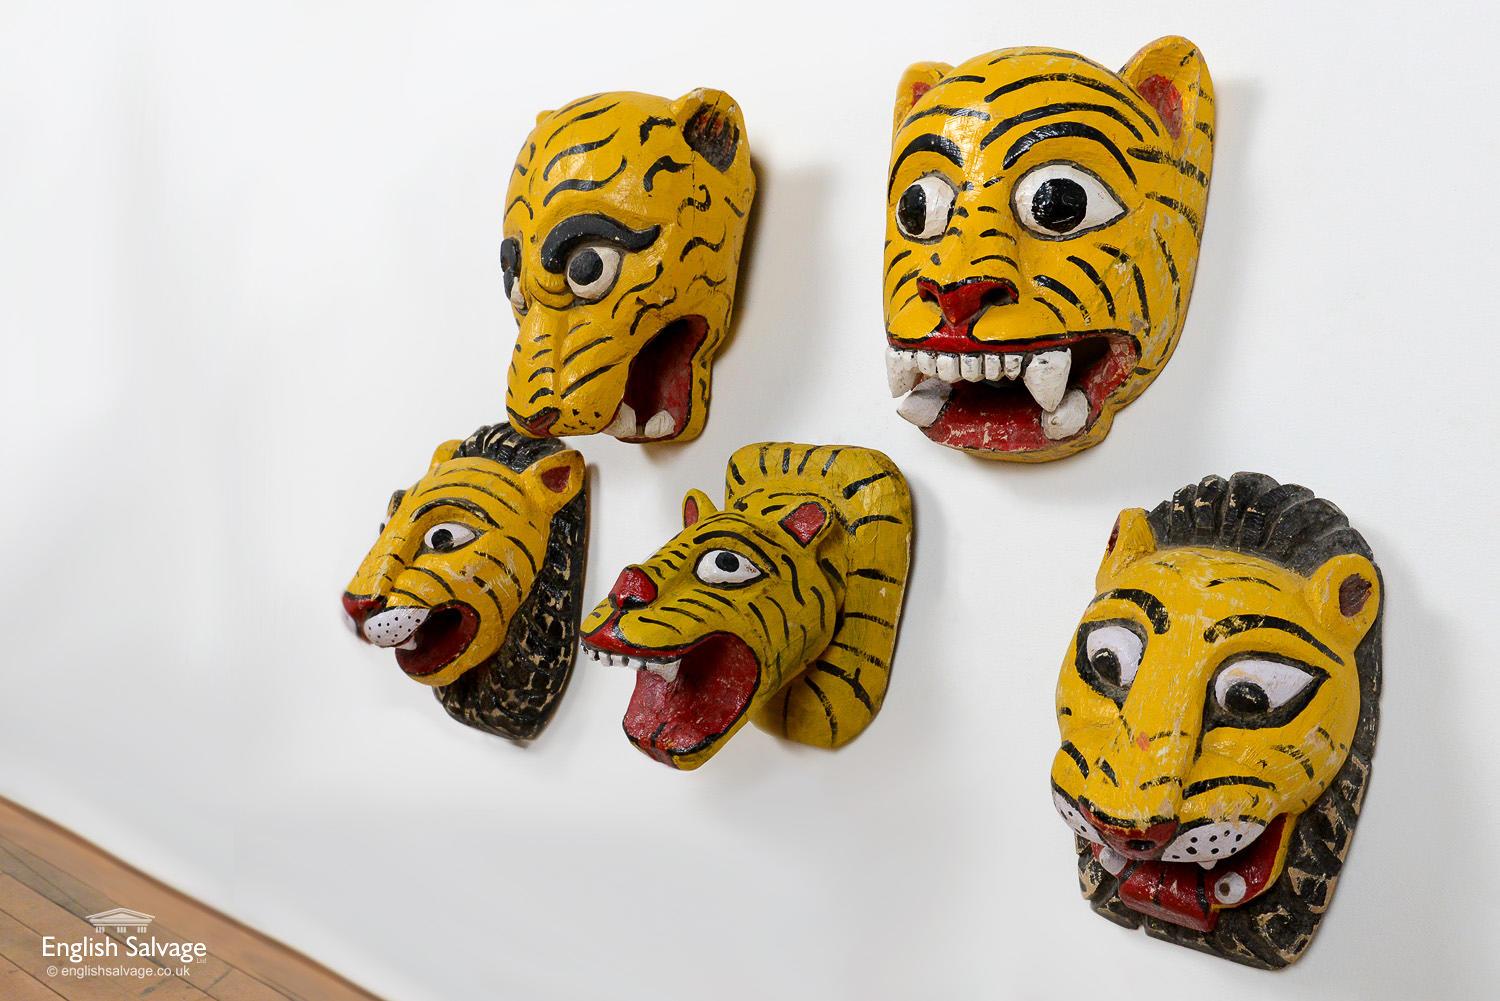 Asian Vintage Indian Painted Tiger Head Masks, 20th Century For Sale